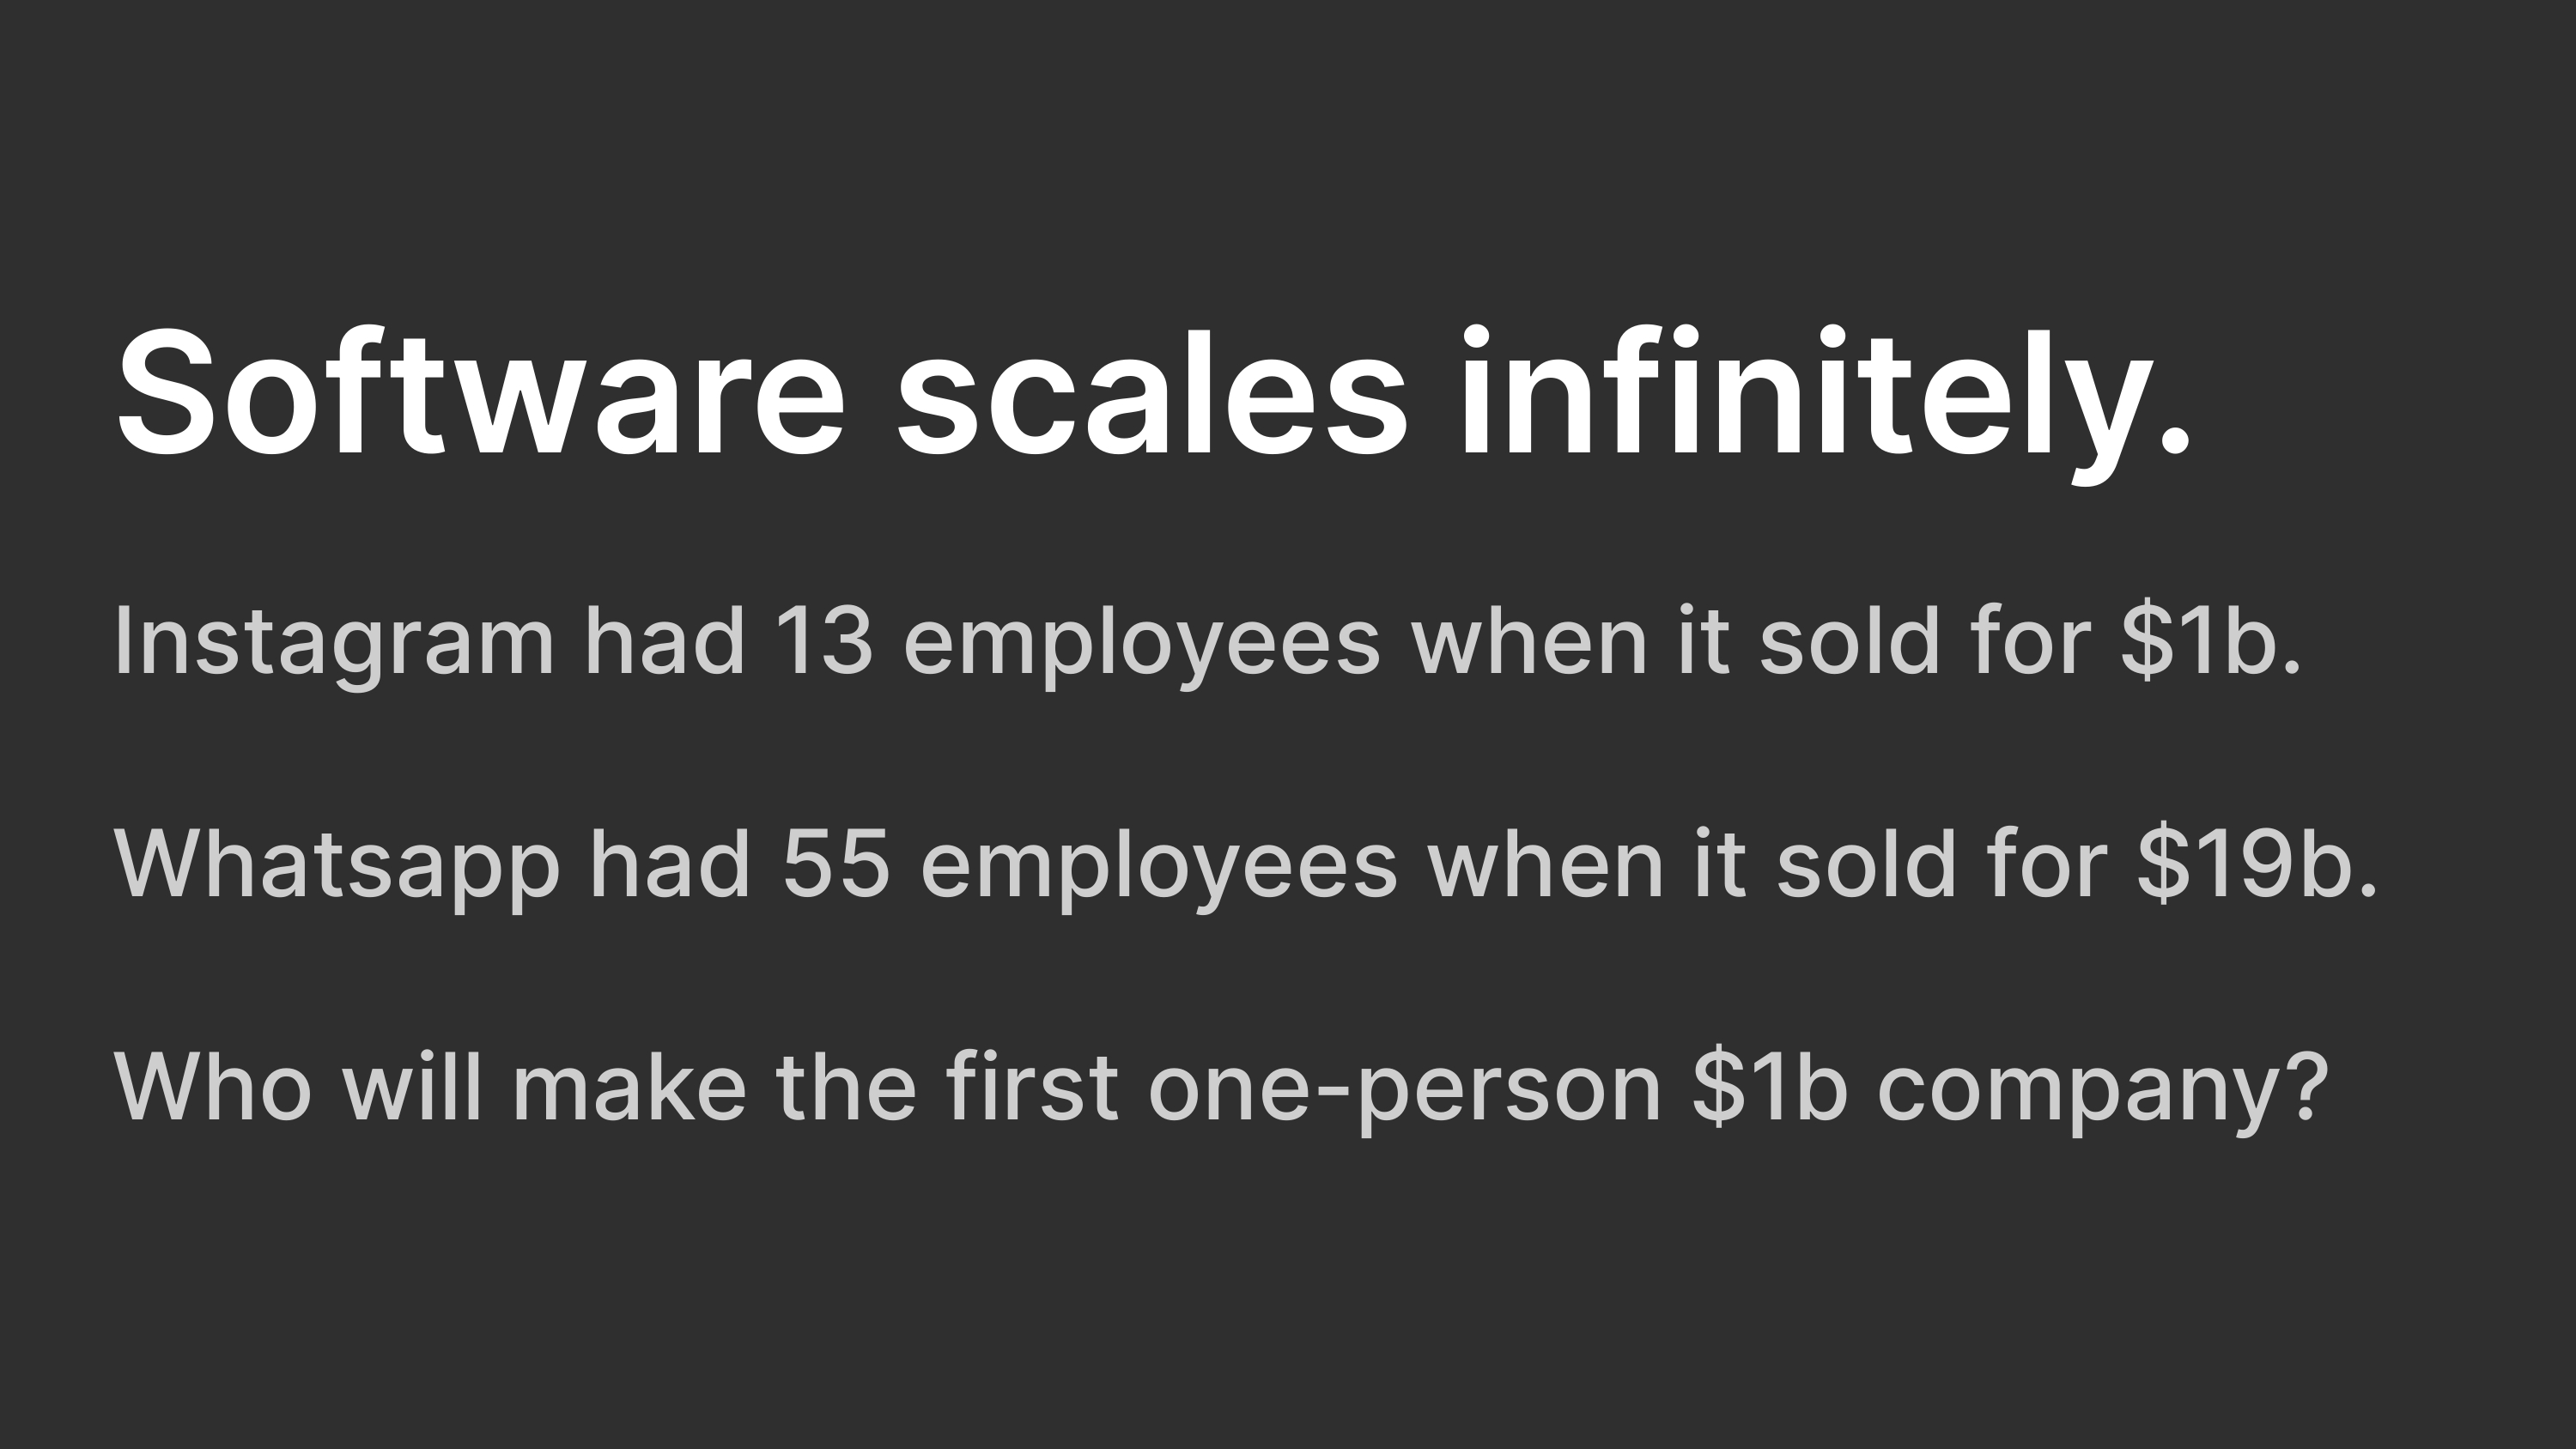 Software scales infinitely. Instagram had 13 employees when it sold for $1b. Whatsapp had 55 employees when it sold for $19b. Who will make the first one-person $1b company?